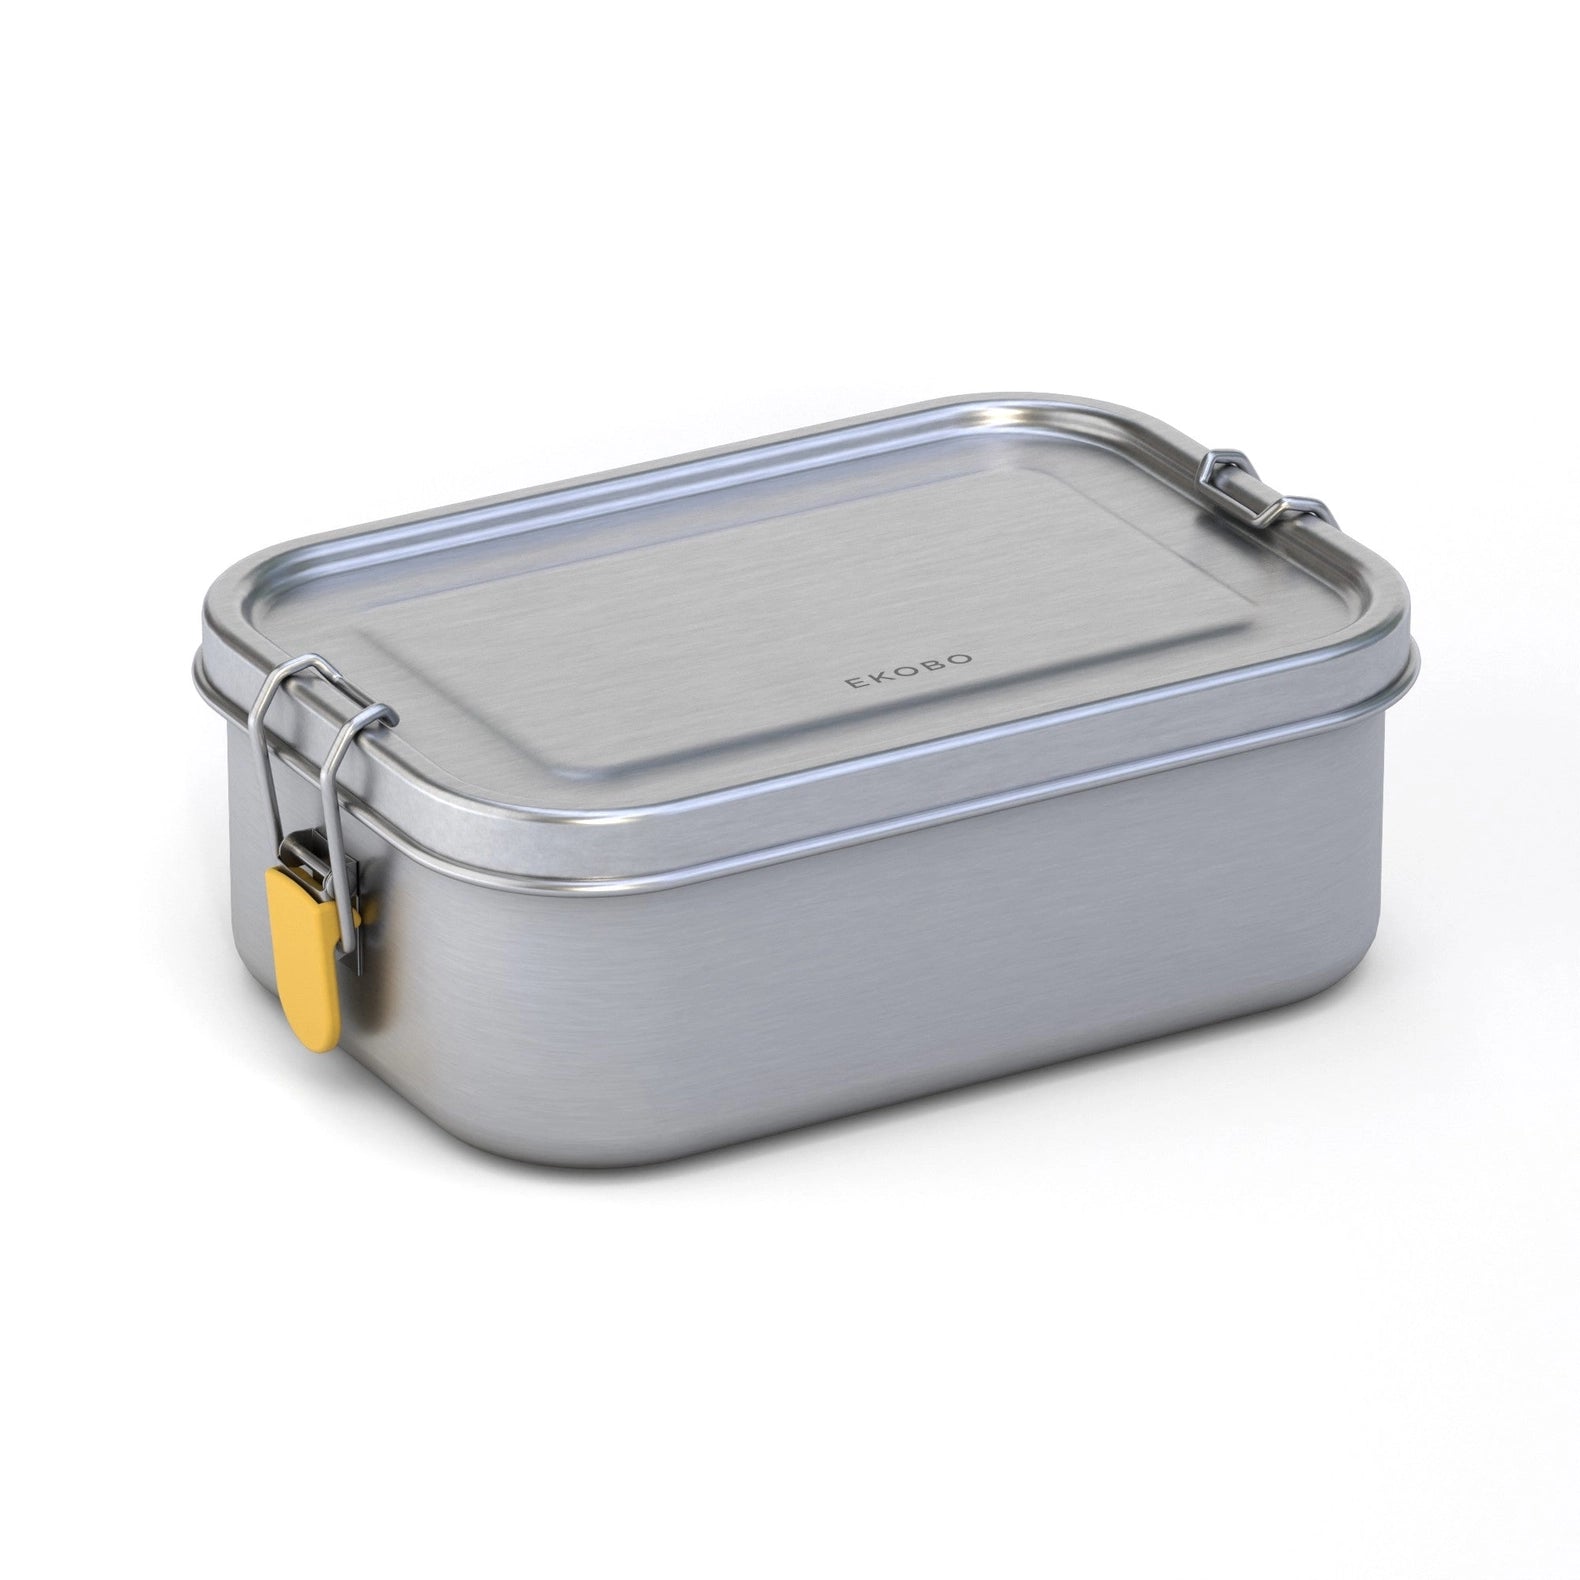 Stainless Steel Lunch Box with Heat Safe Insert - Yellow